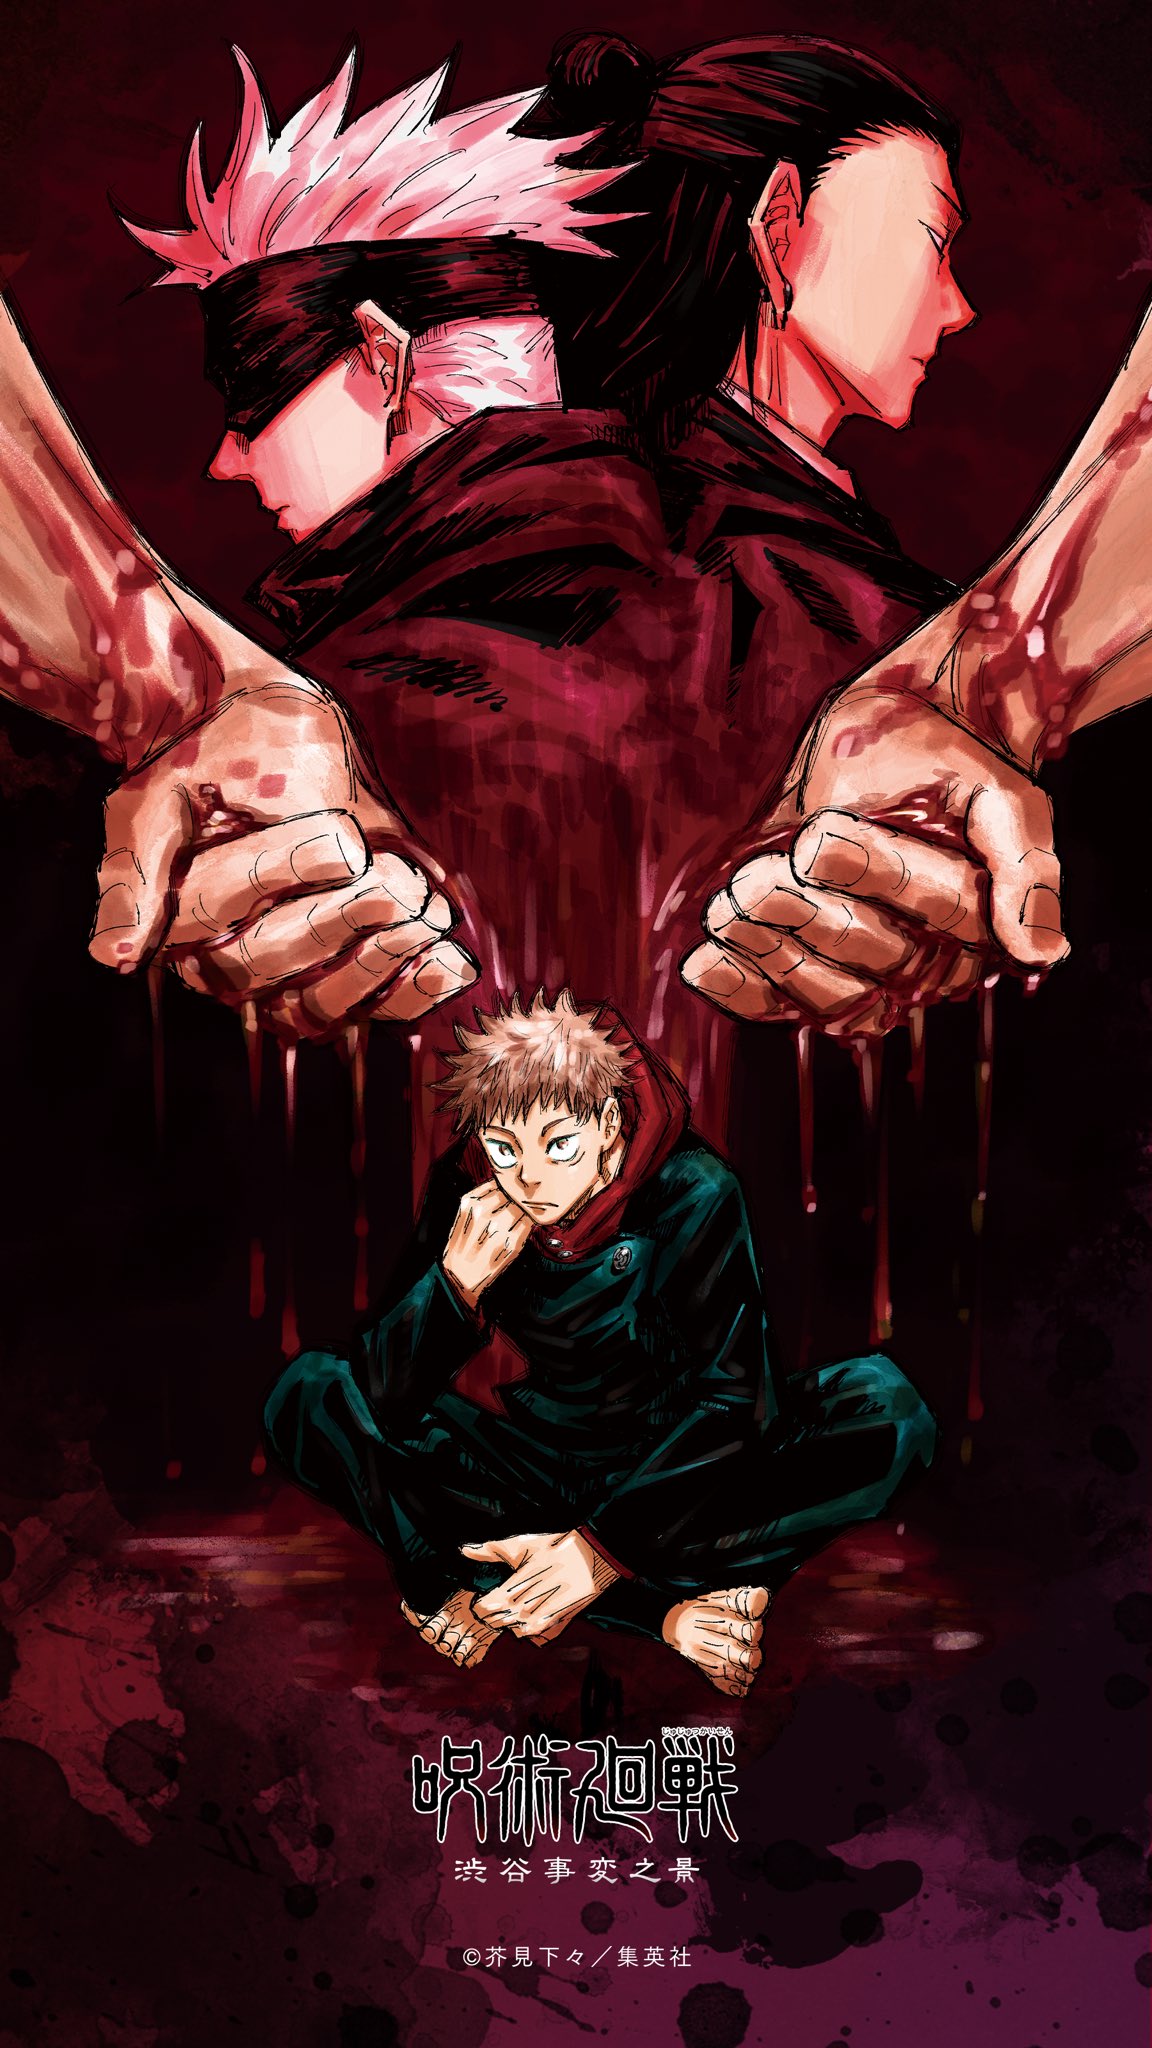 Jujutsu Kaisen 0 Movie has exceeded 104 billion yen in box office revenue  with over 76 million admissions since it was released on December 24 2021  in Japanese Theaters  ranime